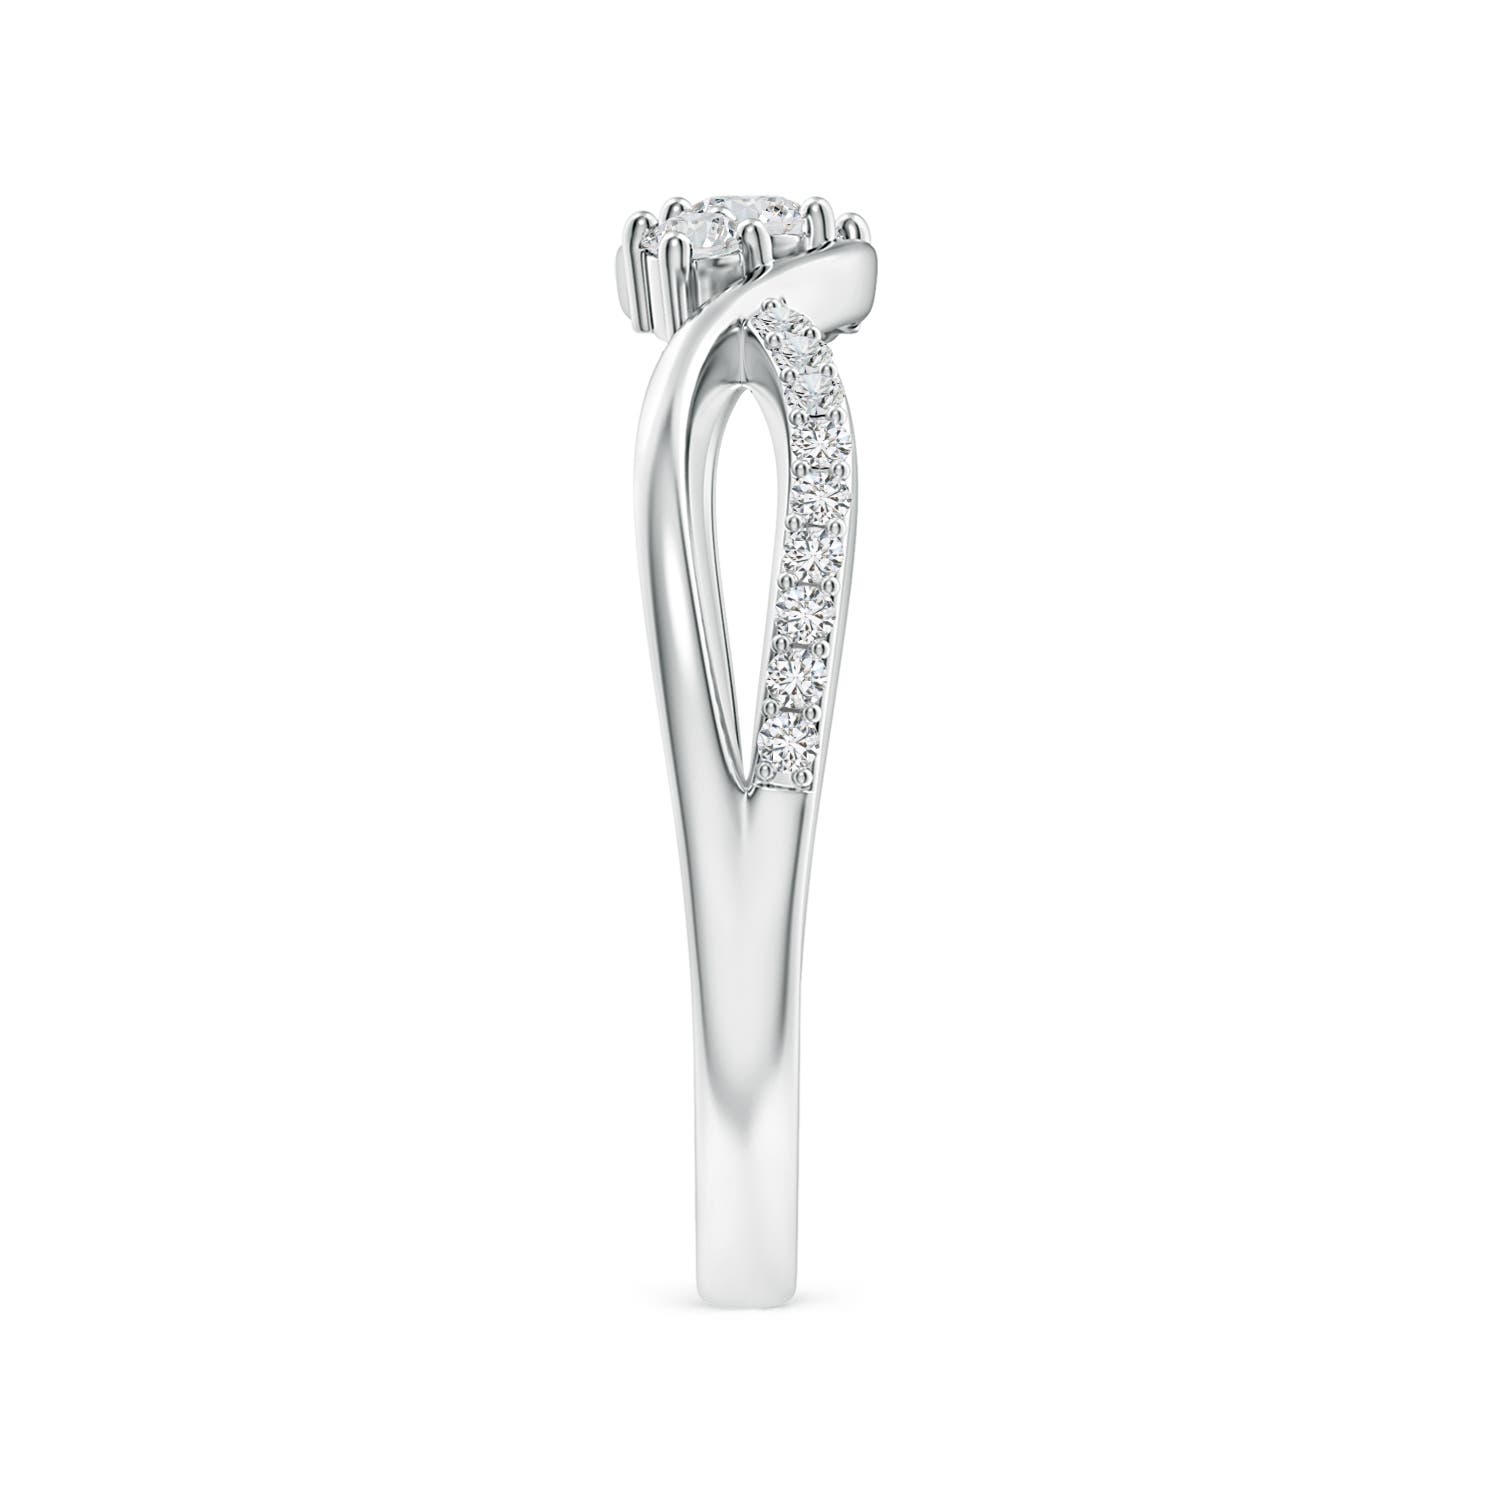 H, SI2 / 0.25 CT / 14 KT White Gold